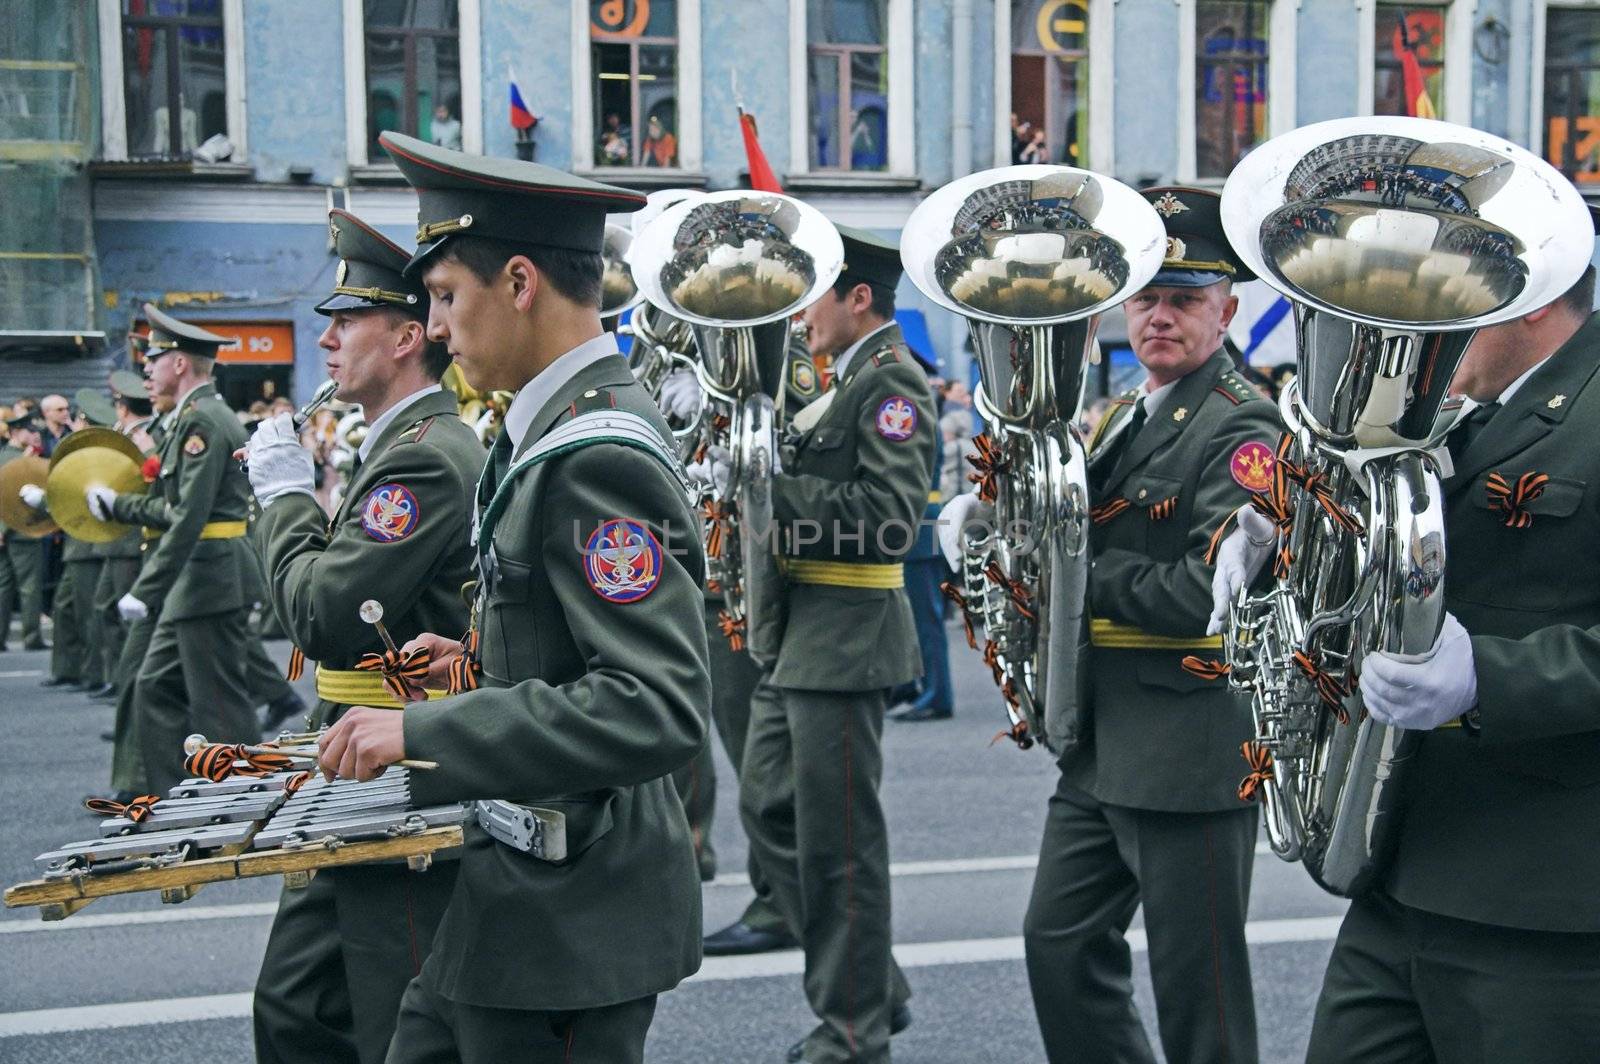 ST PETERSBURG - MAY 9: Military orchestra musicians parading to celebrate World War II Victory Day May 9, 2008, St Petersburg, Russia.